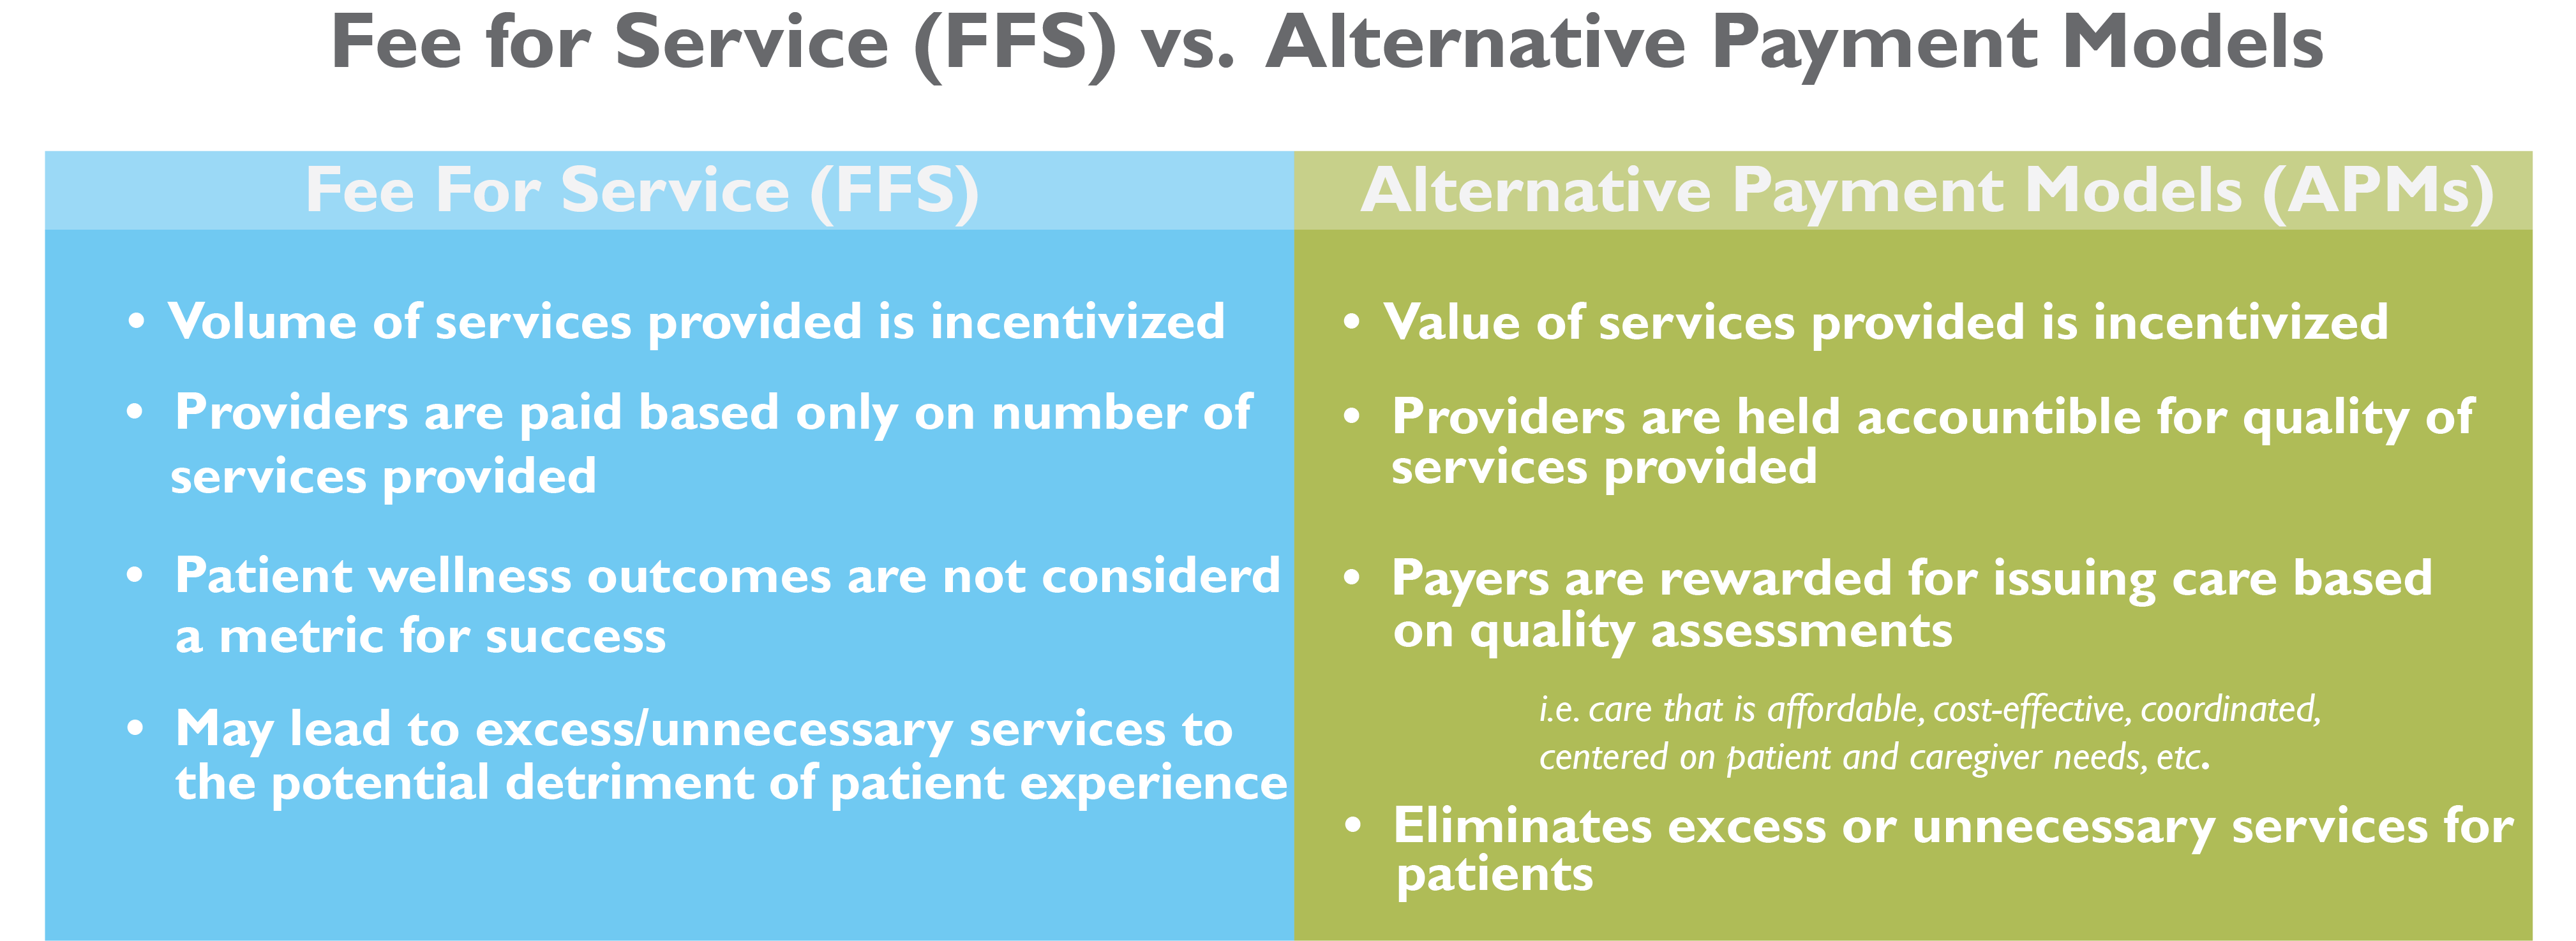 Alternative Payment Models vs. Fee for Service payment systems shows that APMs value efficiency of services over volume and holds providers accountable for the quality of services. 